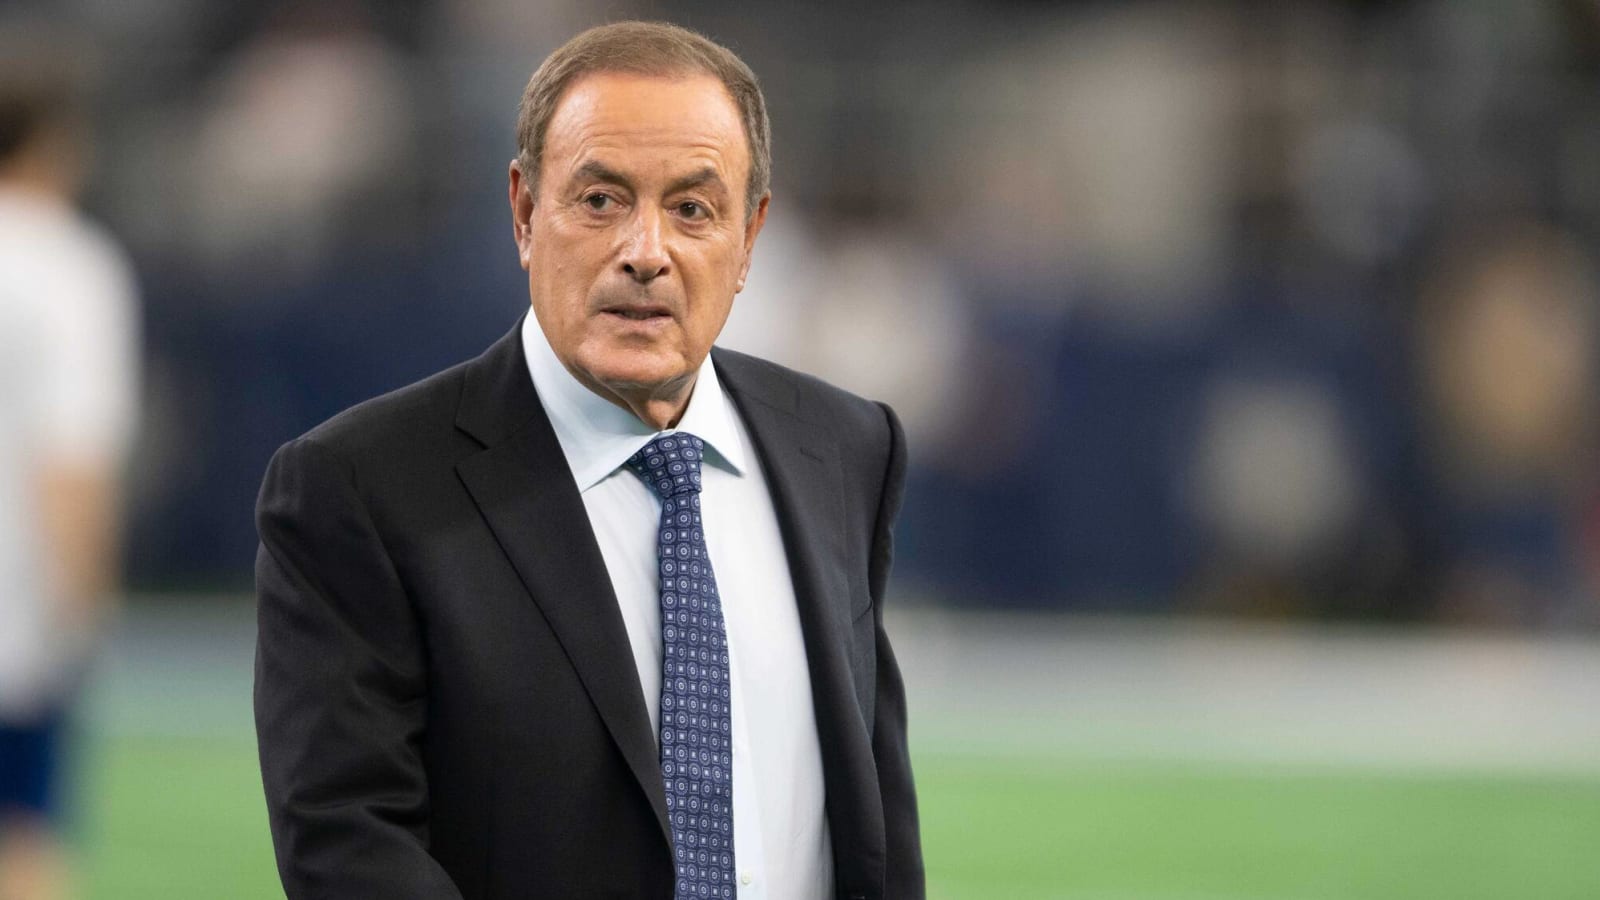 Broadcaster Al Michaels was considering FOX job before joining Amazon